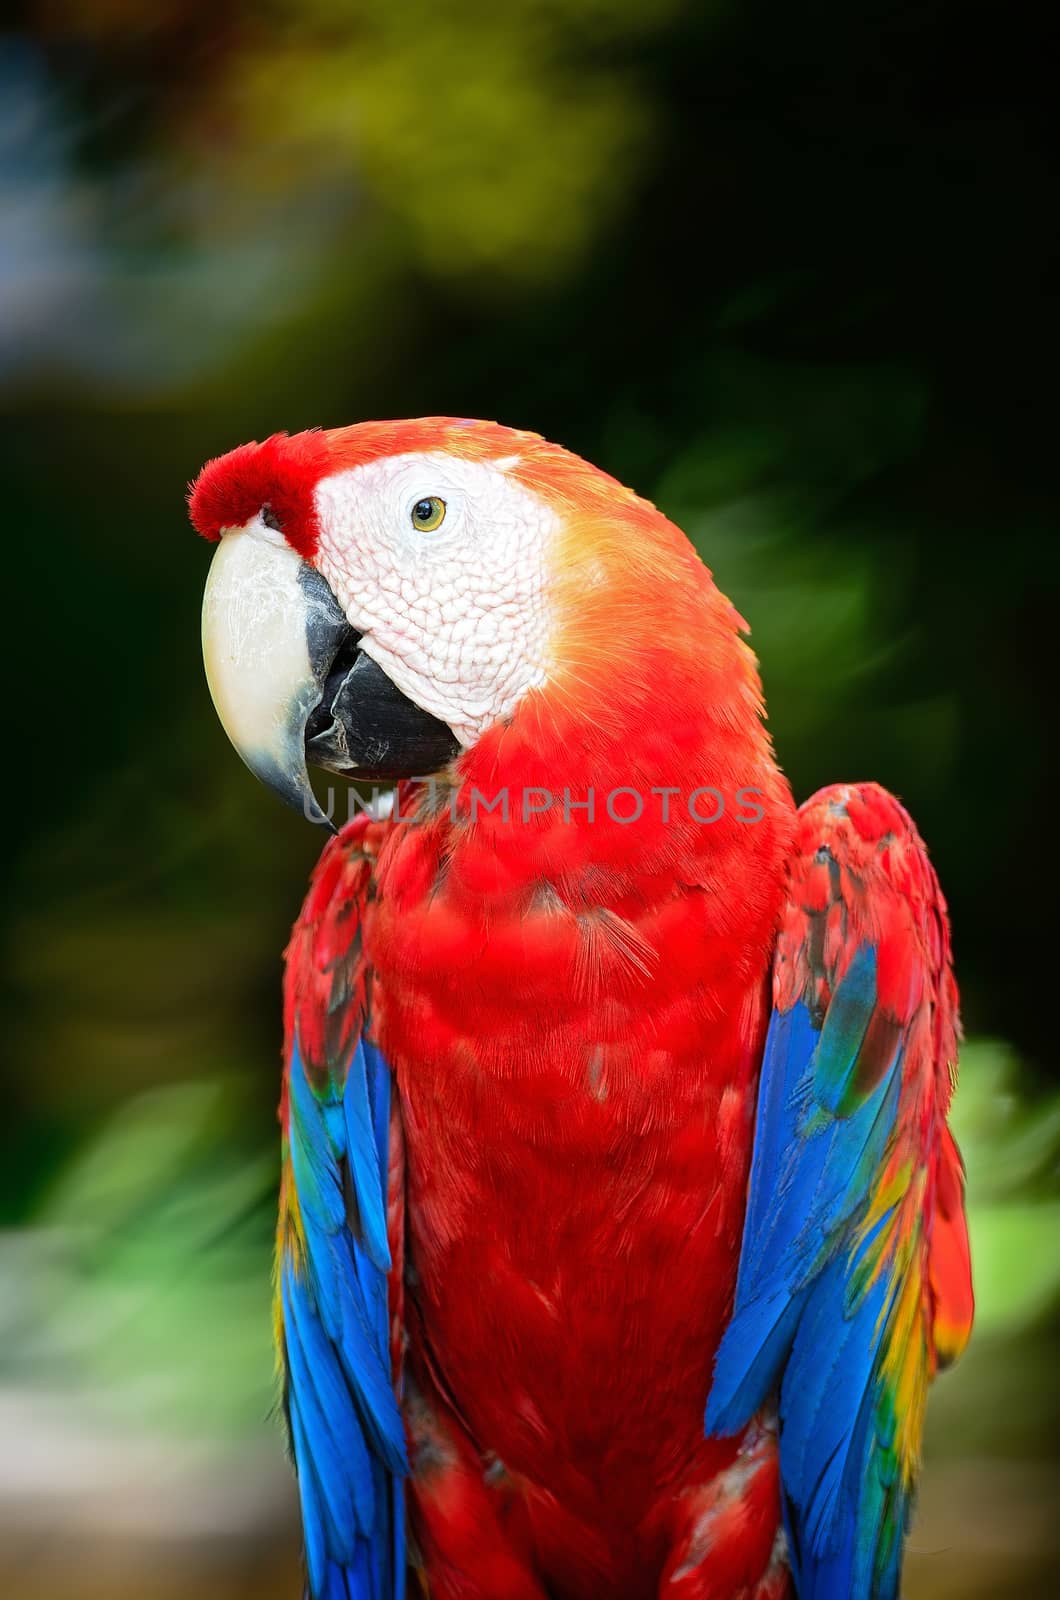 Colorful Scarlet Macaw aviary, breast profile